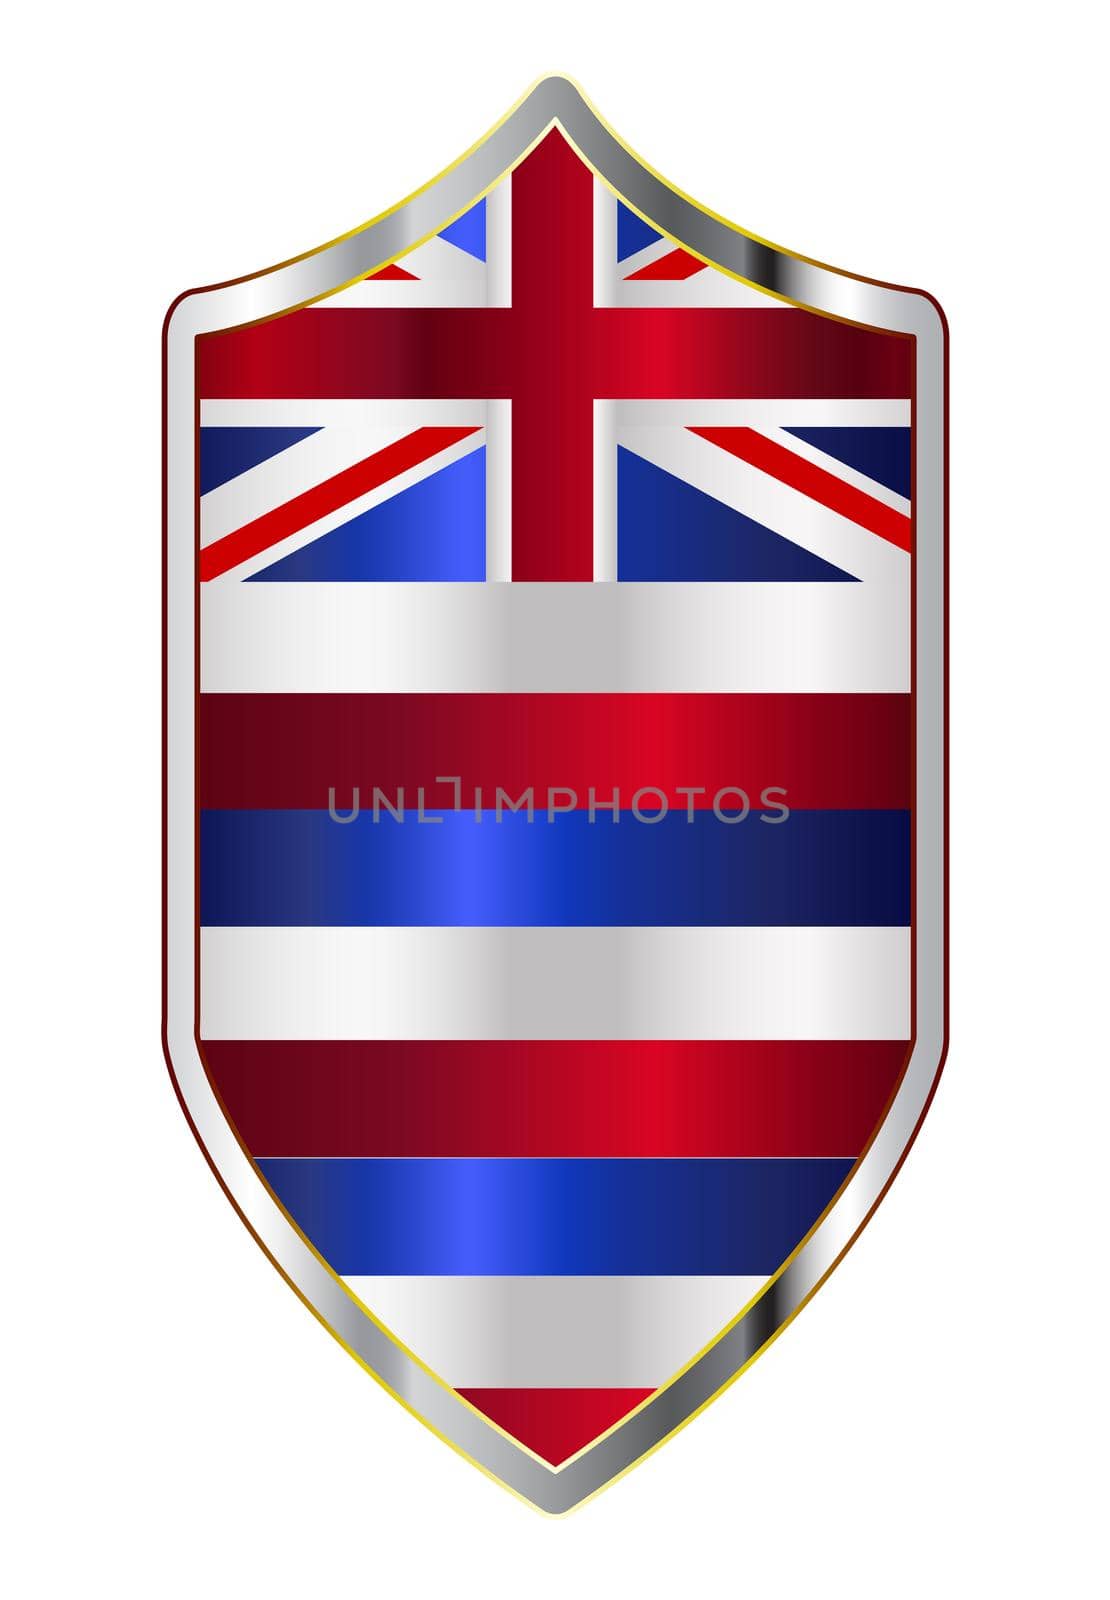 A typical crusader type shield with the state flag of Hawaii all isolated on a white background